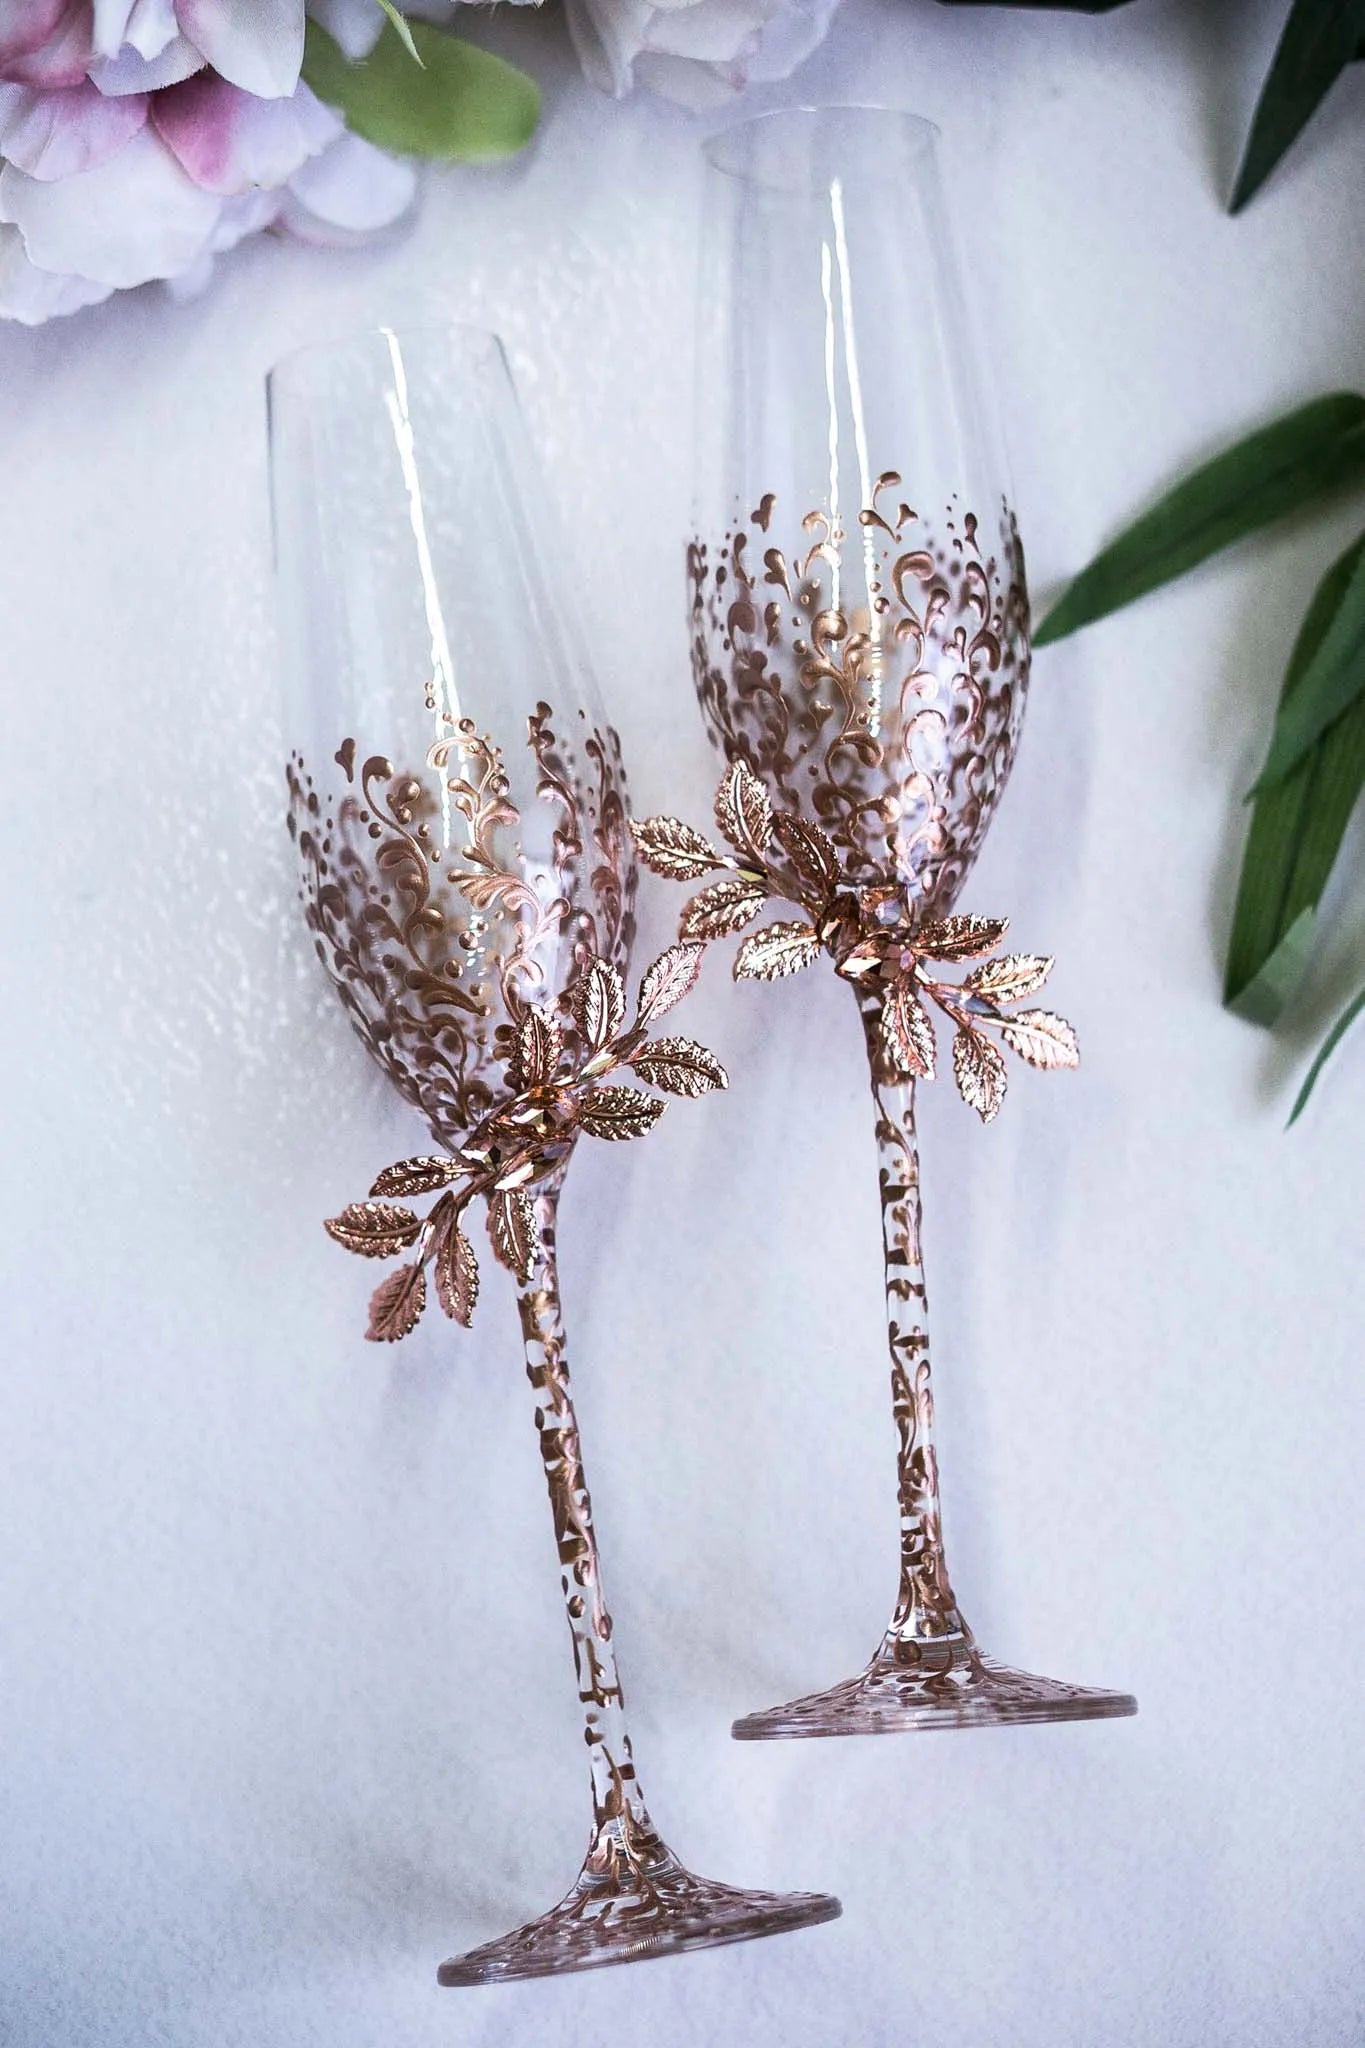 Aurora-inspired glassware and serving set for wedding toasts and cake cutting